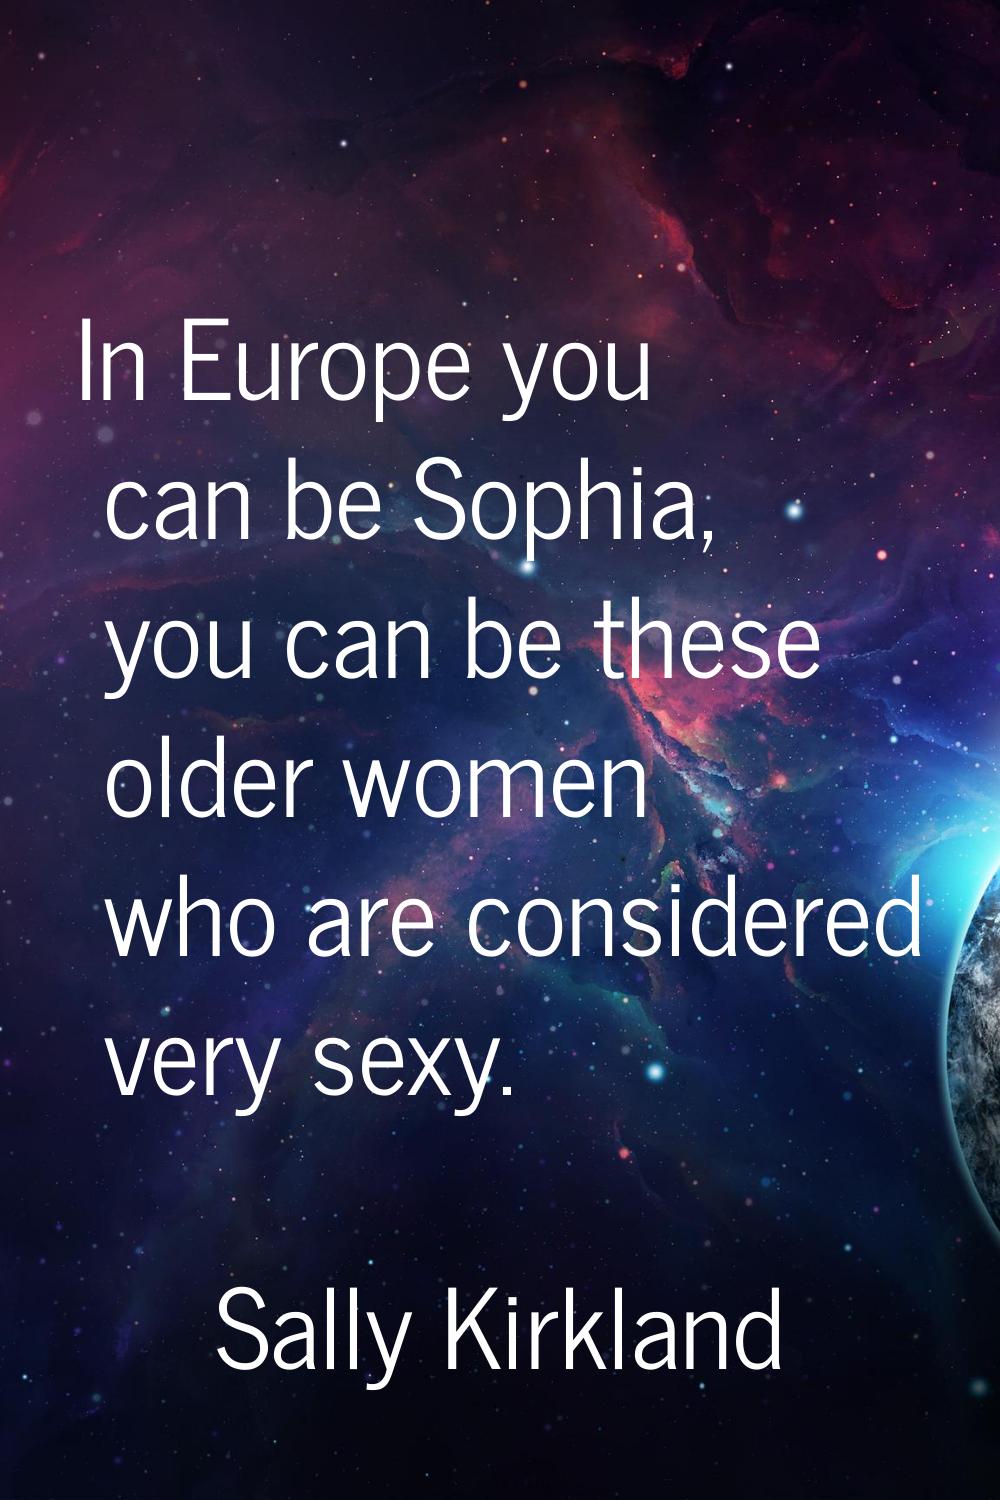 In Europe you can be Sophia, you can be these older women who are considered very sexy.